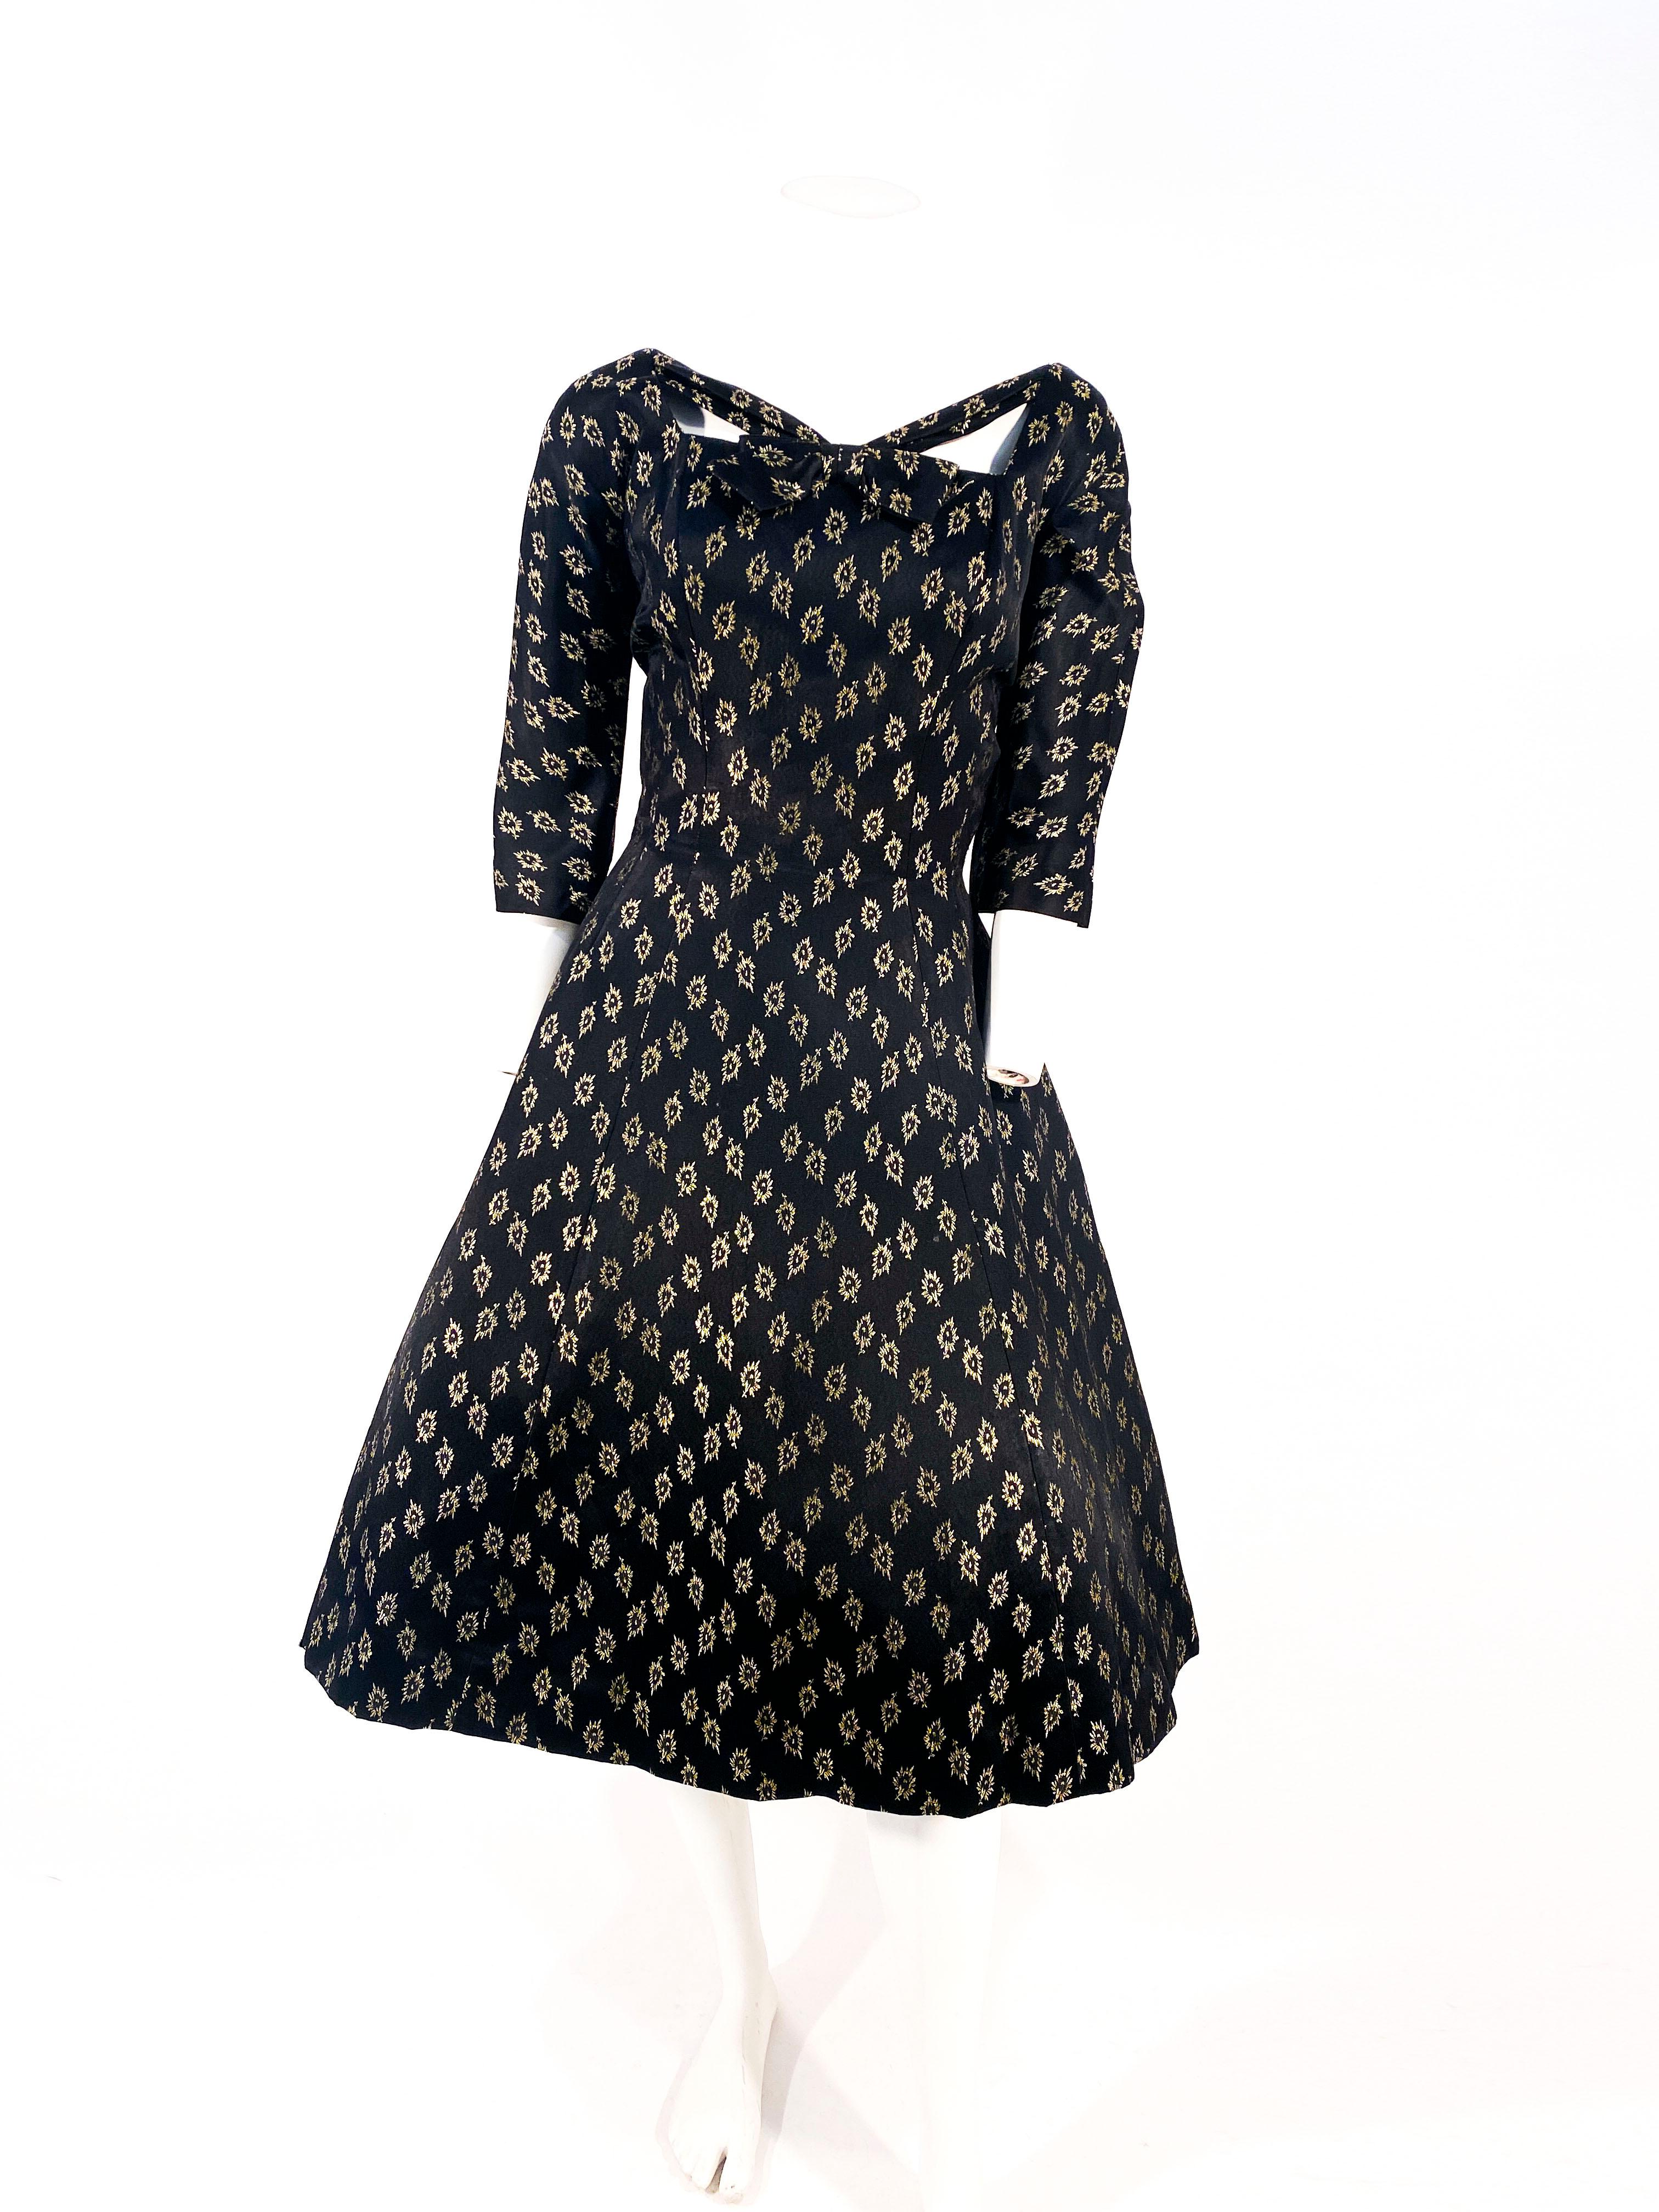 Late 1950s to early 1960s Suzy Perette cocktail dress featuring a black satin brocade detailed with gold metallic lurex in a repeating floral motif. The bodice is structured and fitted with three-quarter length sleeve, and a modified striped square